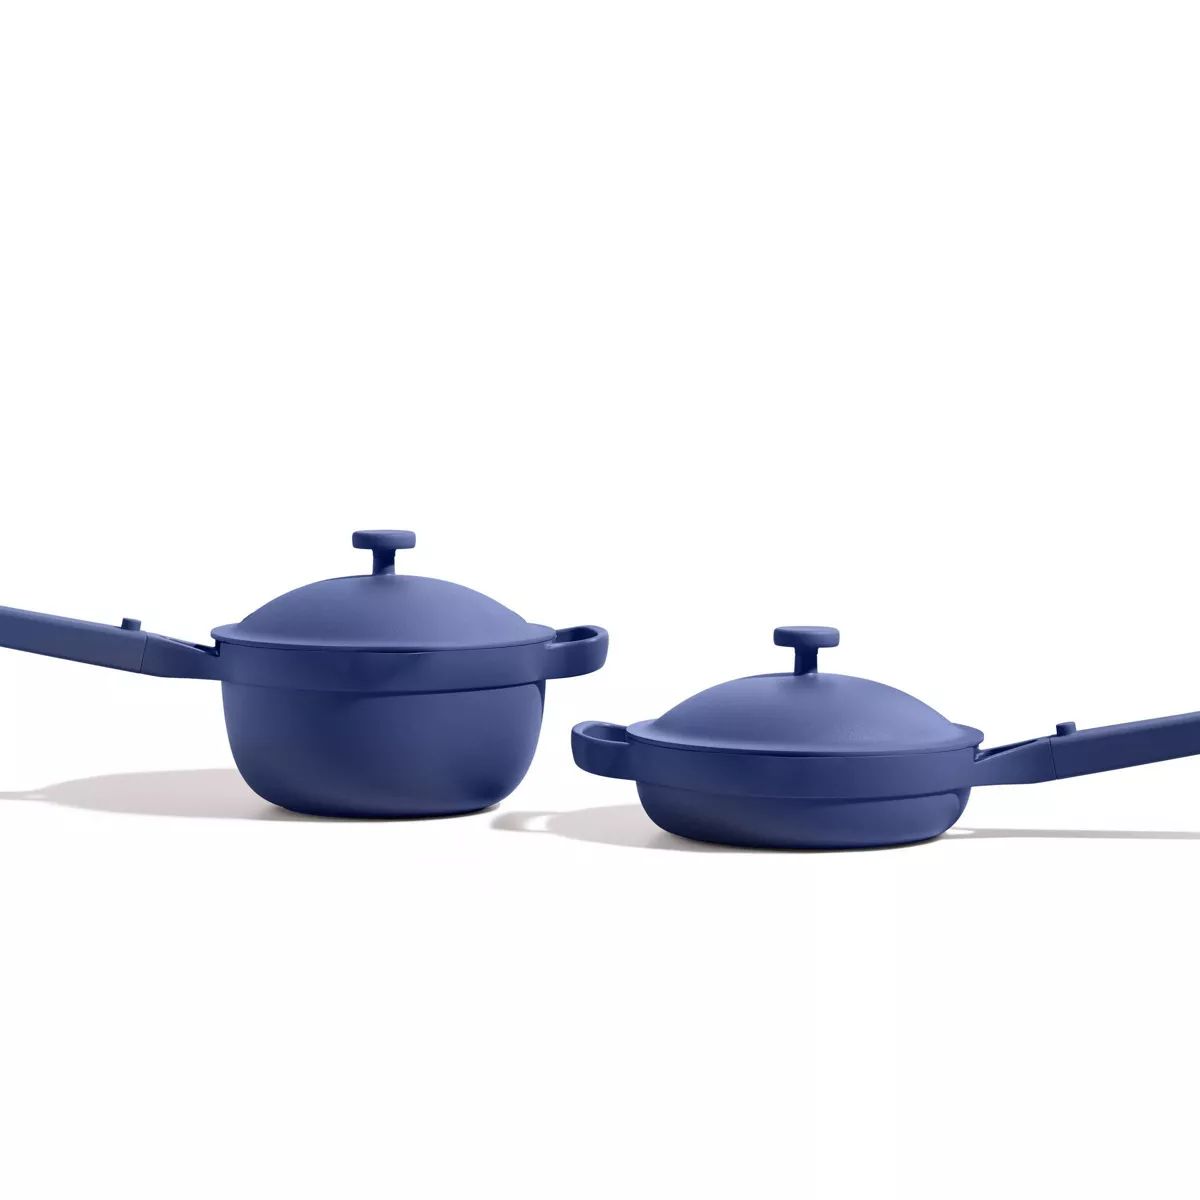 Our Place 8.5" Ceramic Nonstick Home Cook Duo Set 2.0 | Target